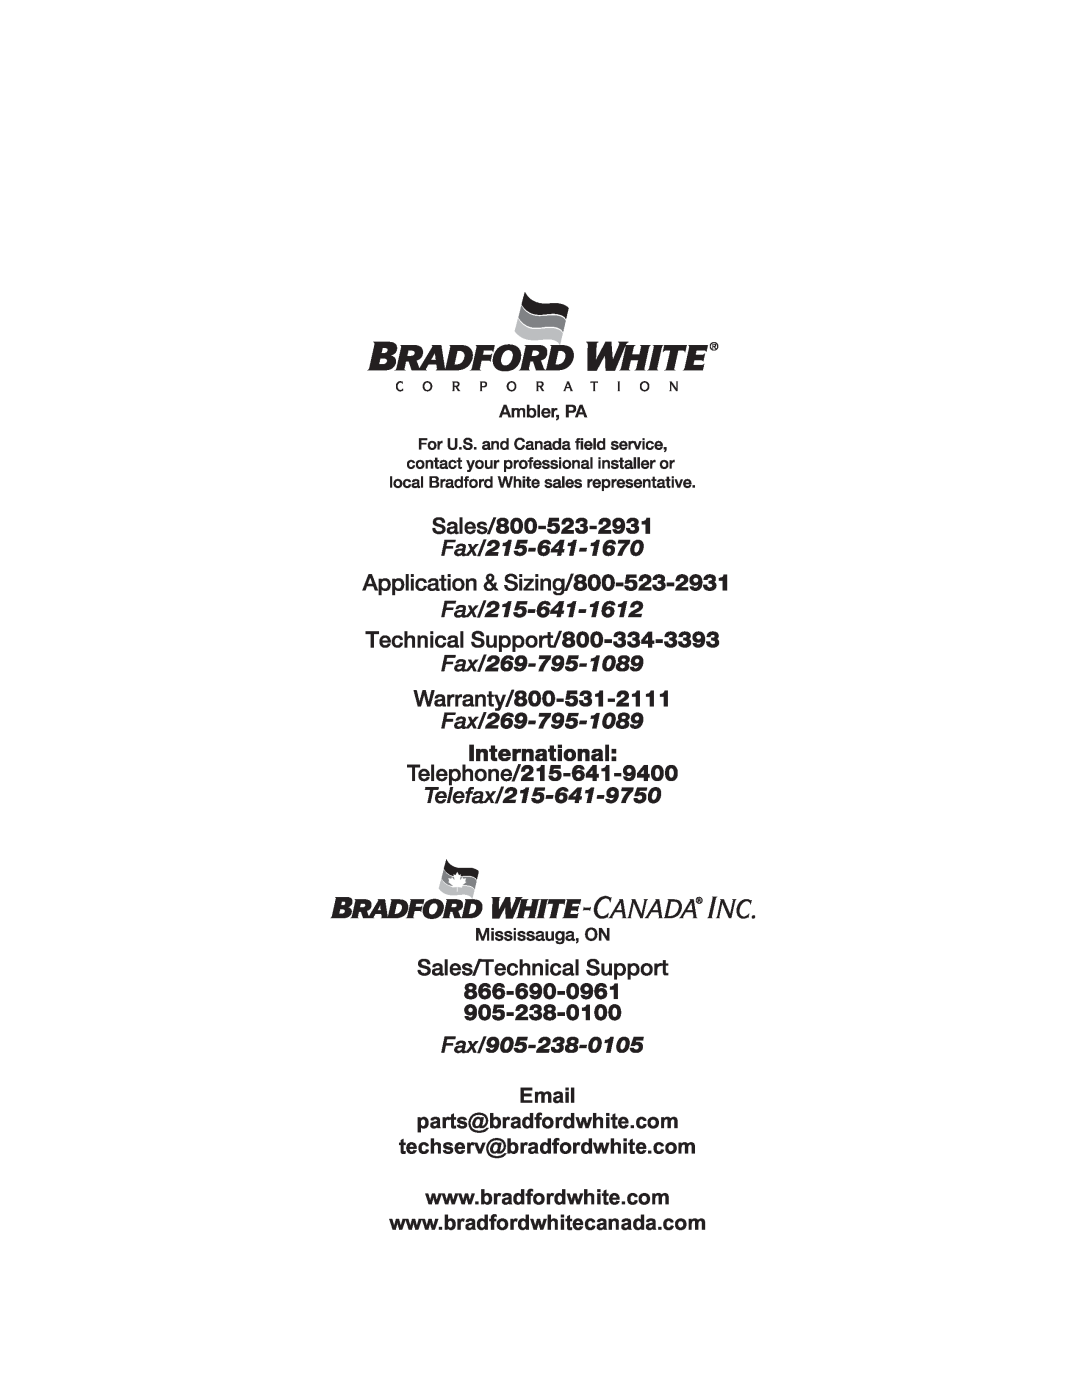 Bradford-White Corp CDW2TW Series specifications Application & Sizing/800-523-2931, Fax/215-641-1612 